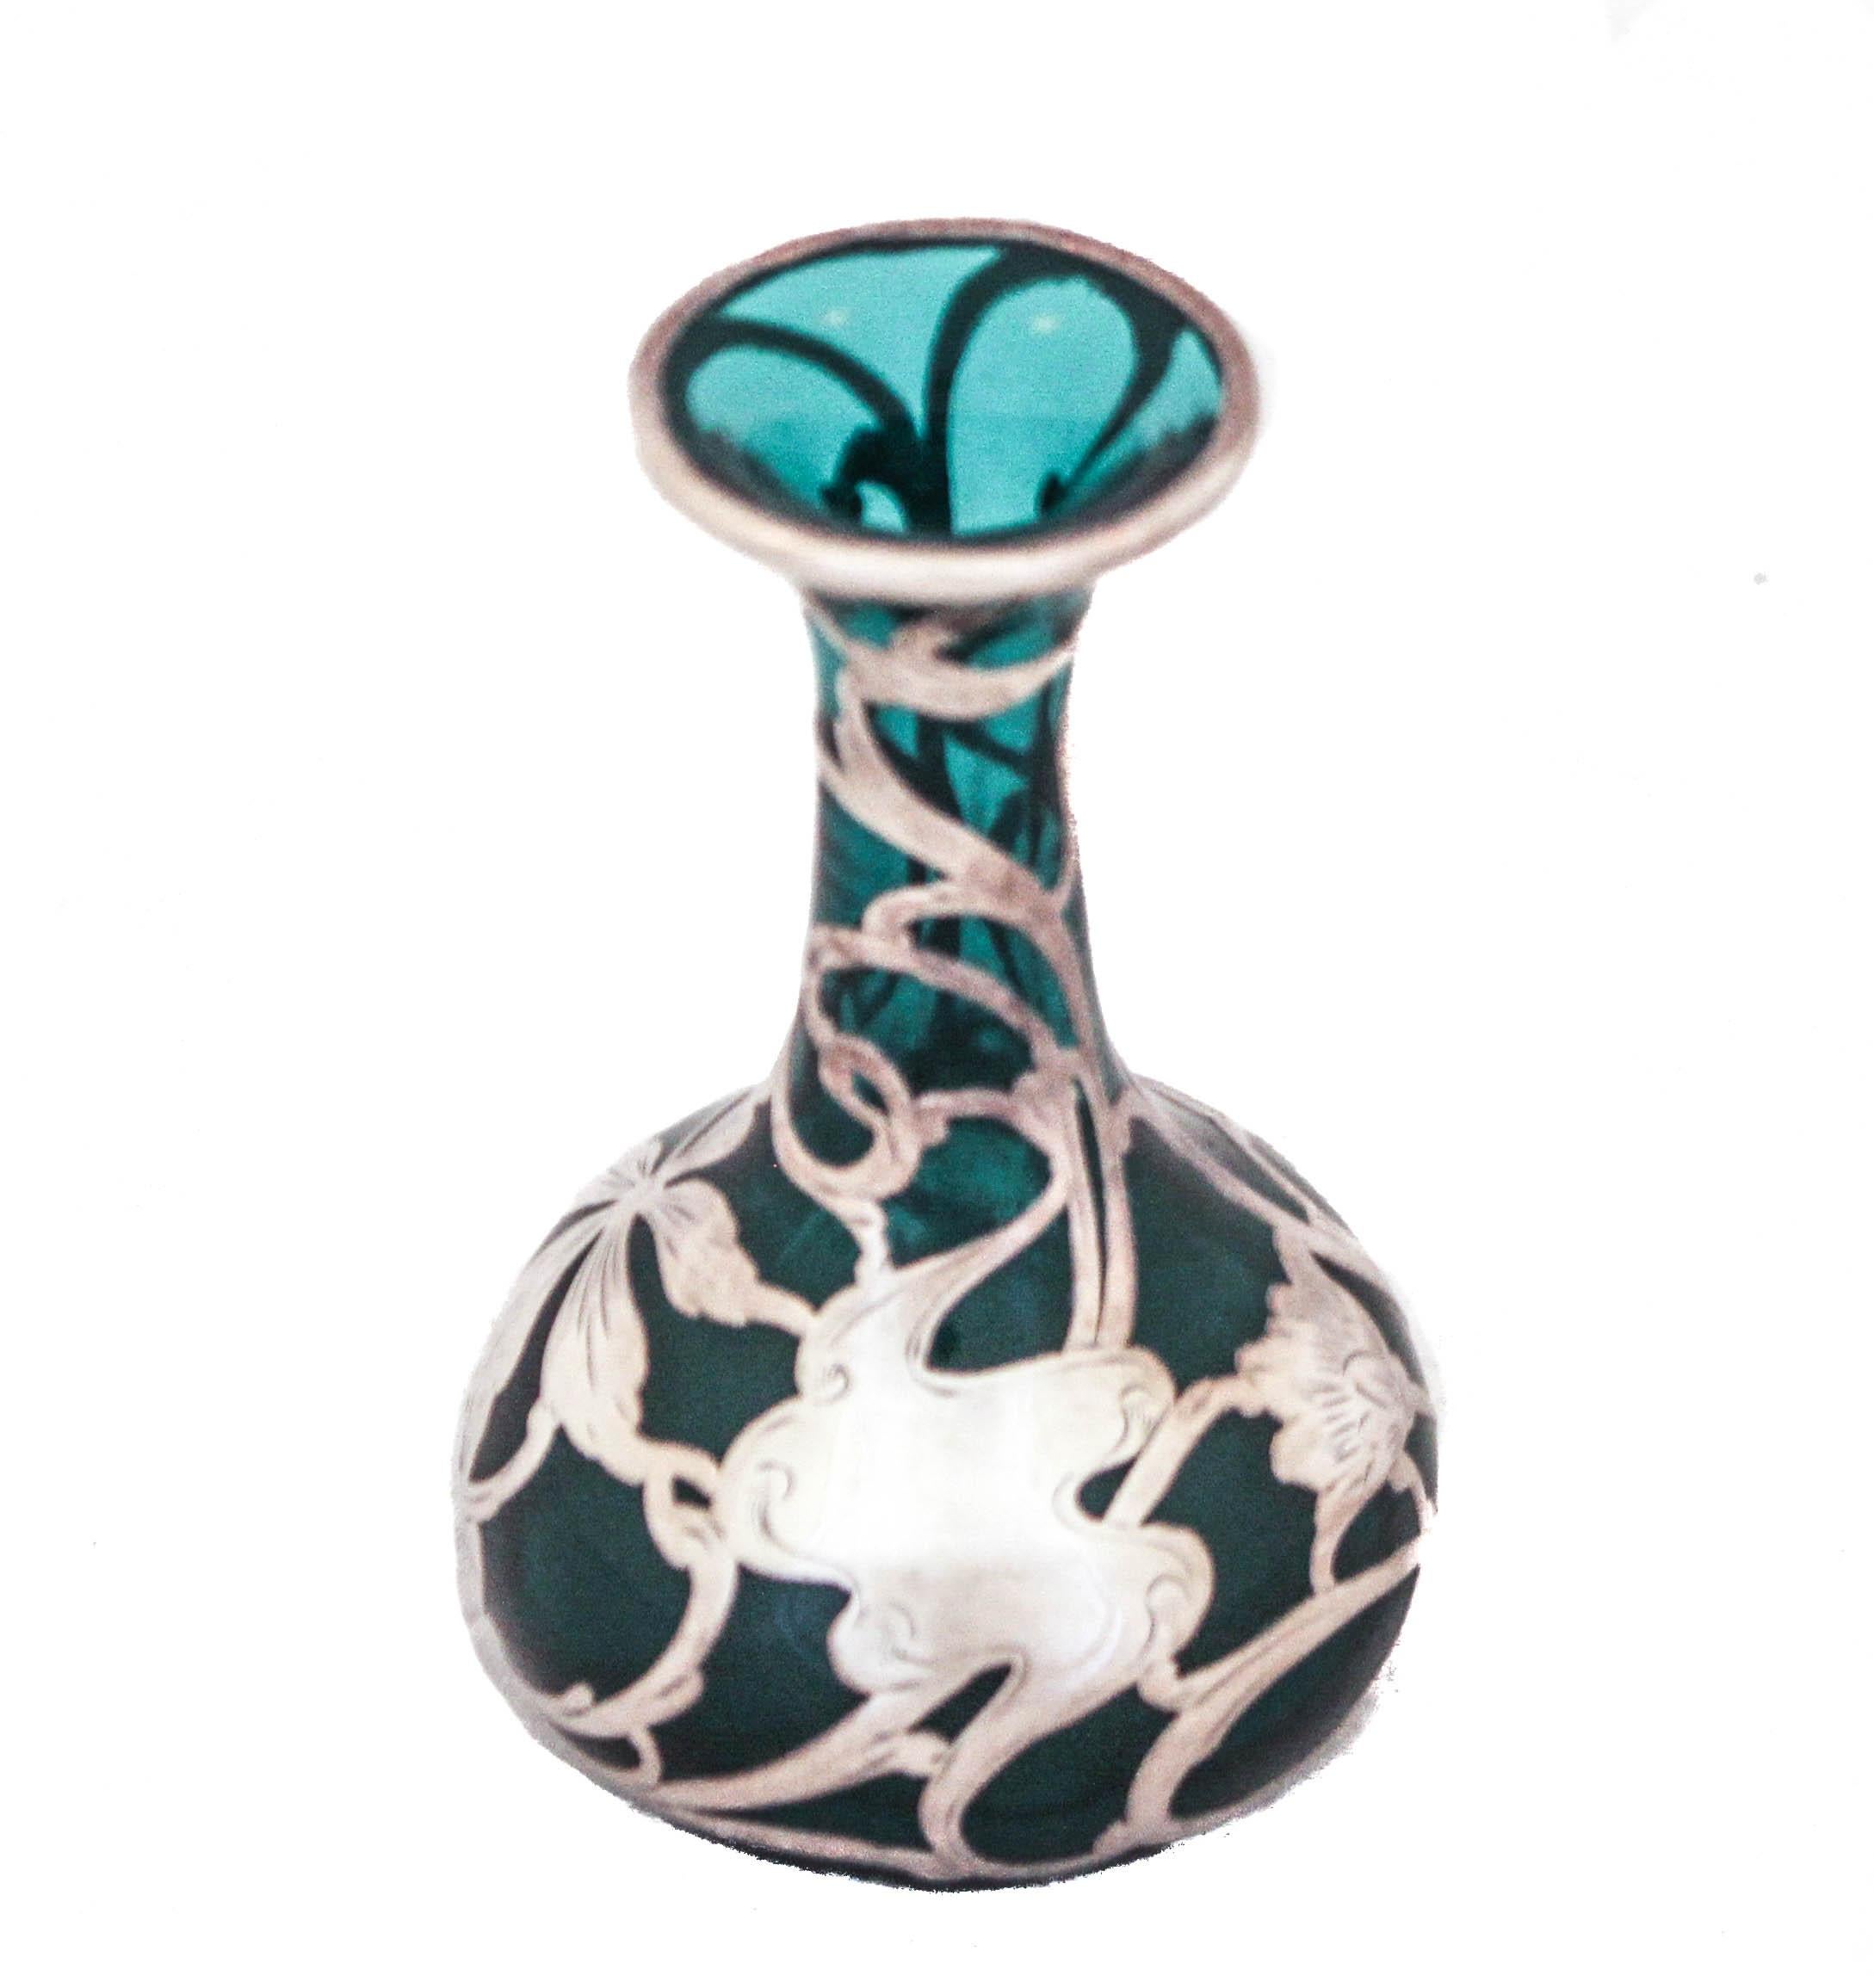 Being offered is a sterling silver Art Nouveau overlay vase in a teal color.  The silver Art Nouveau design is wraps around the entire vase with swirls, flowers and leaves — all motifs in that genre.  What’s very special is that unlike most overlay